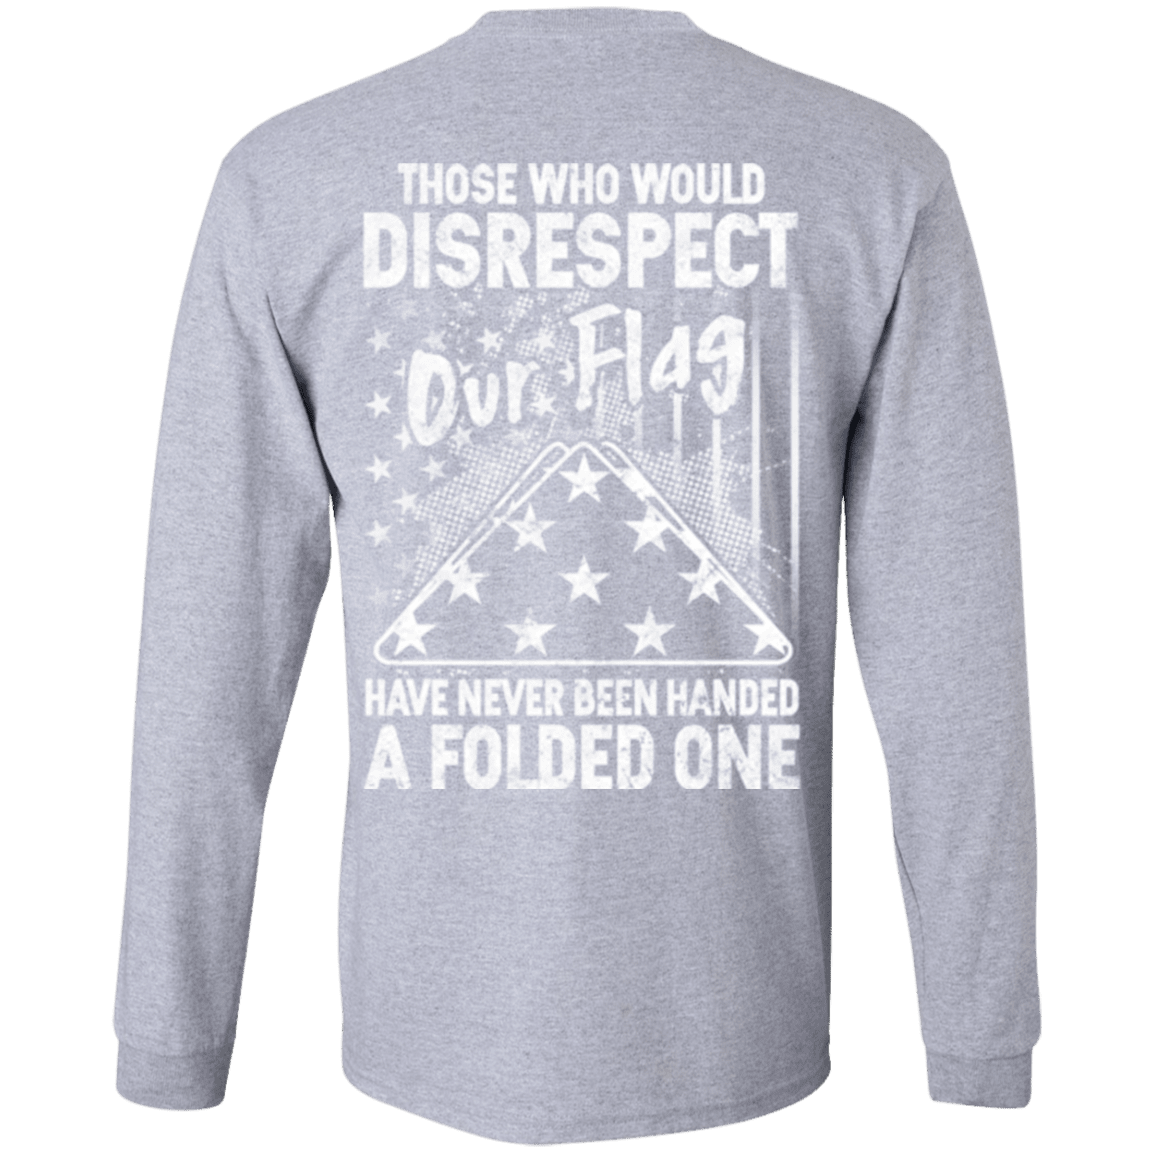 Military T-Shirt "Those Who Would Disrespect Our Flag Veteran"-TShirt-General-Veterans Nation